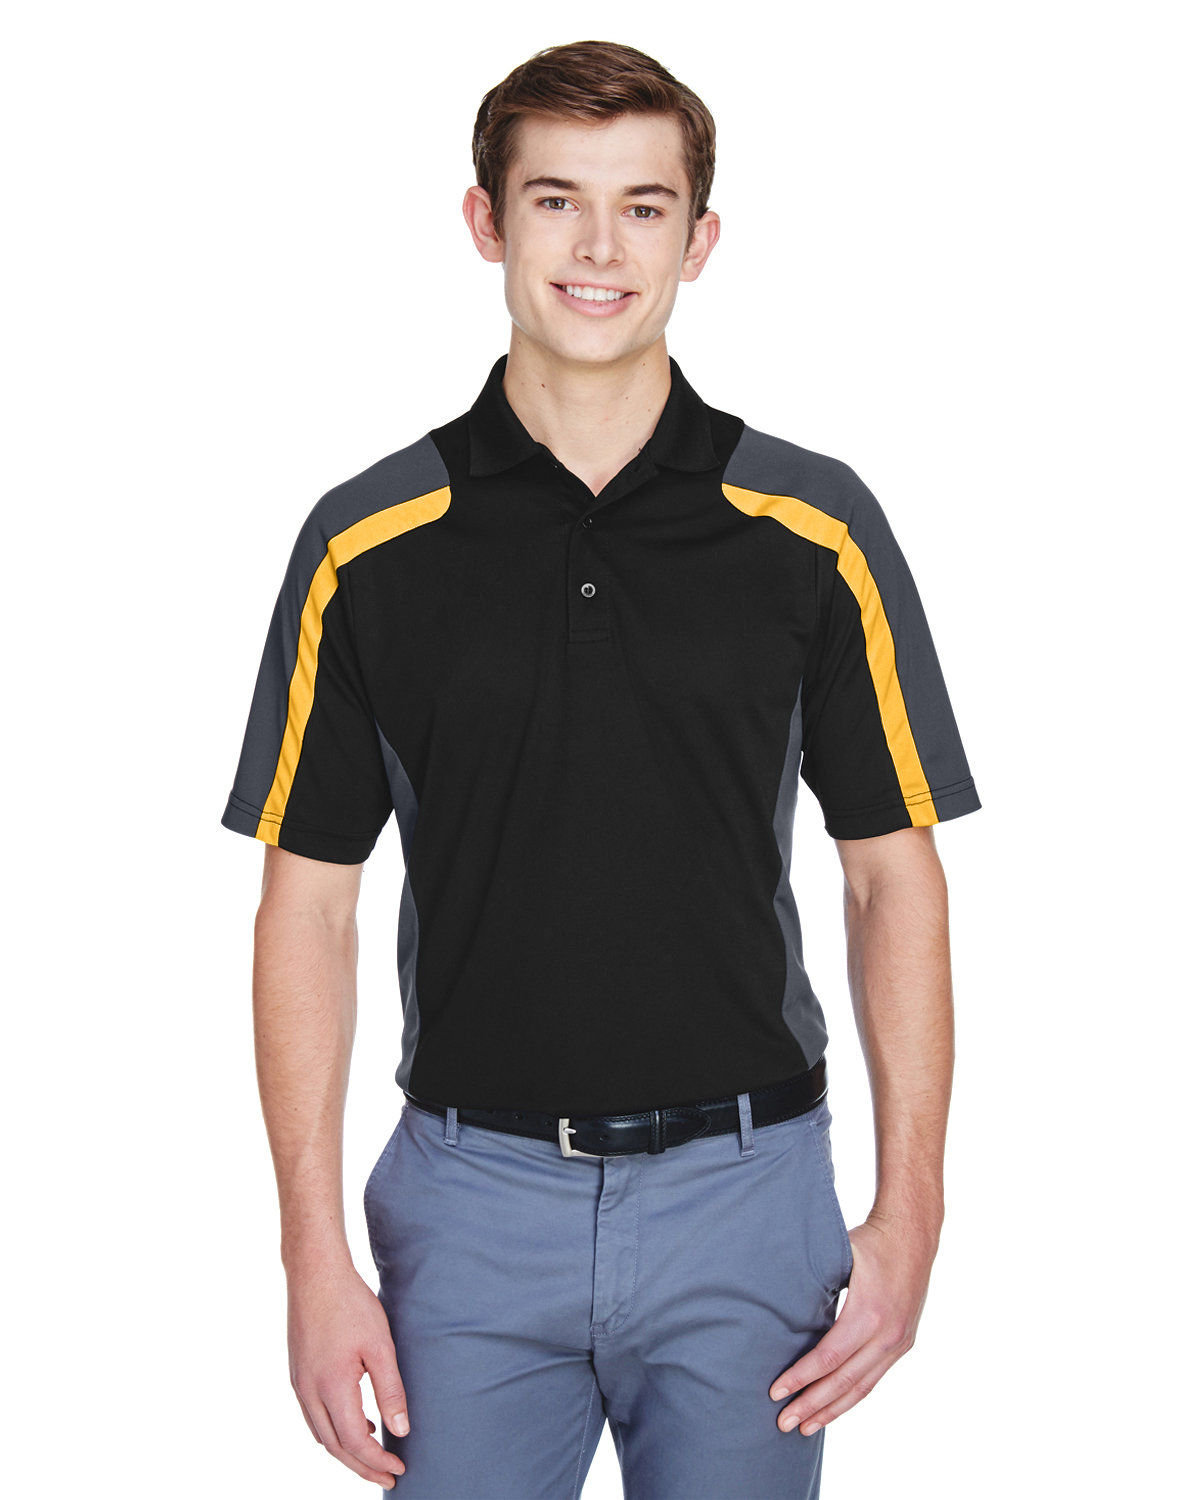 Extreme Men's Eperformance™ Strike Colorblock Snag Protection Polo BLK/ CMPS GOLD 